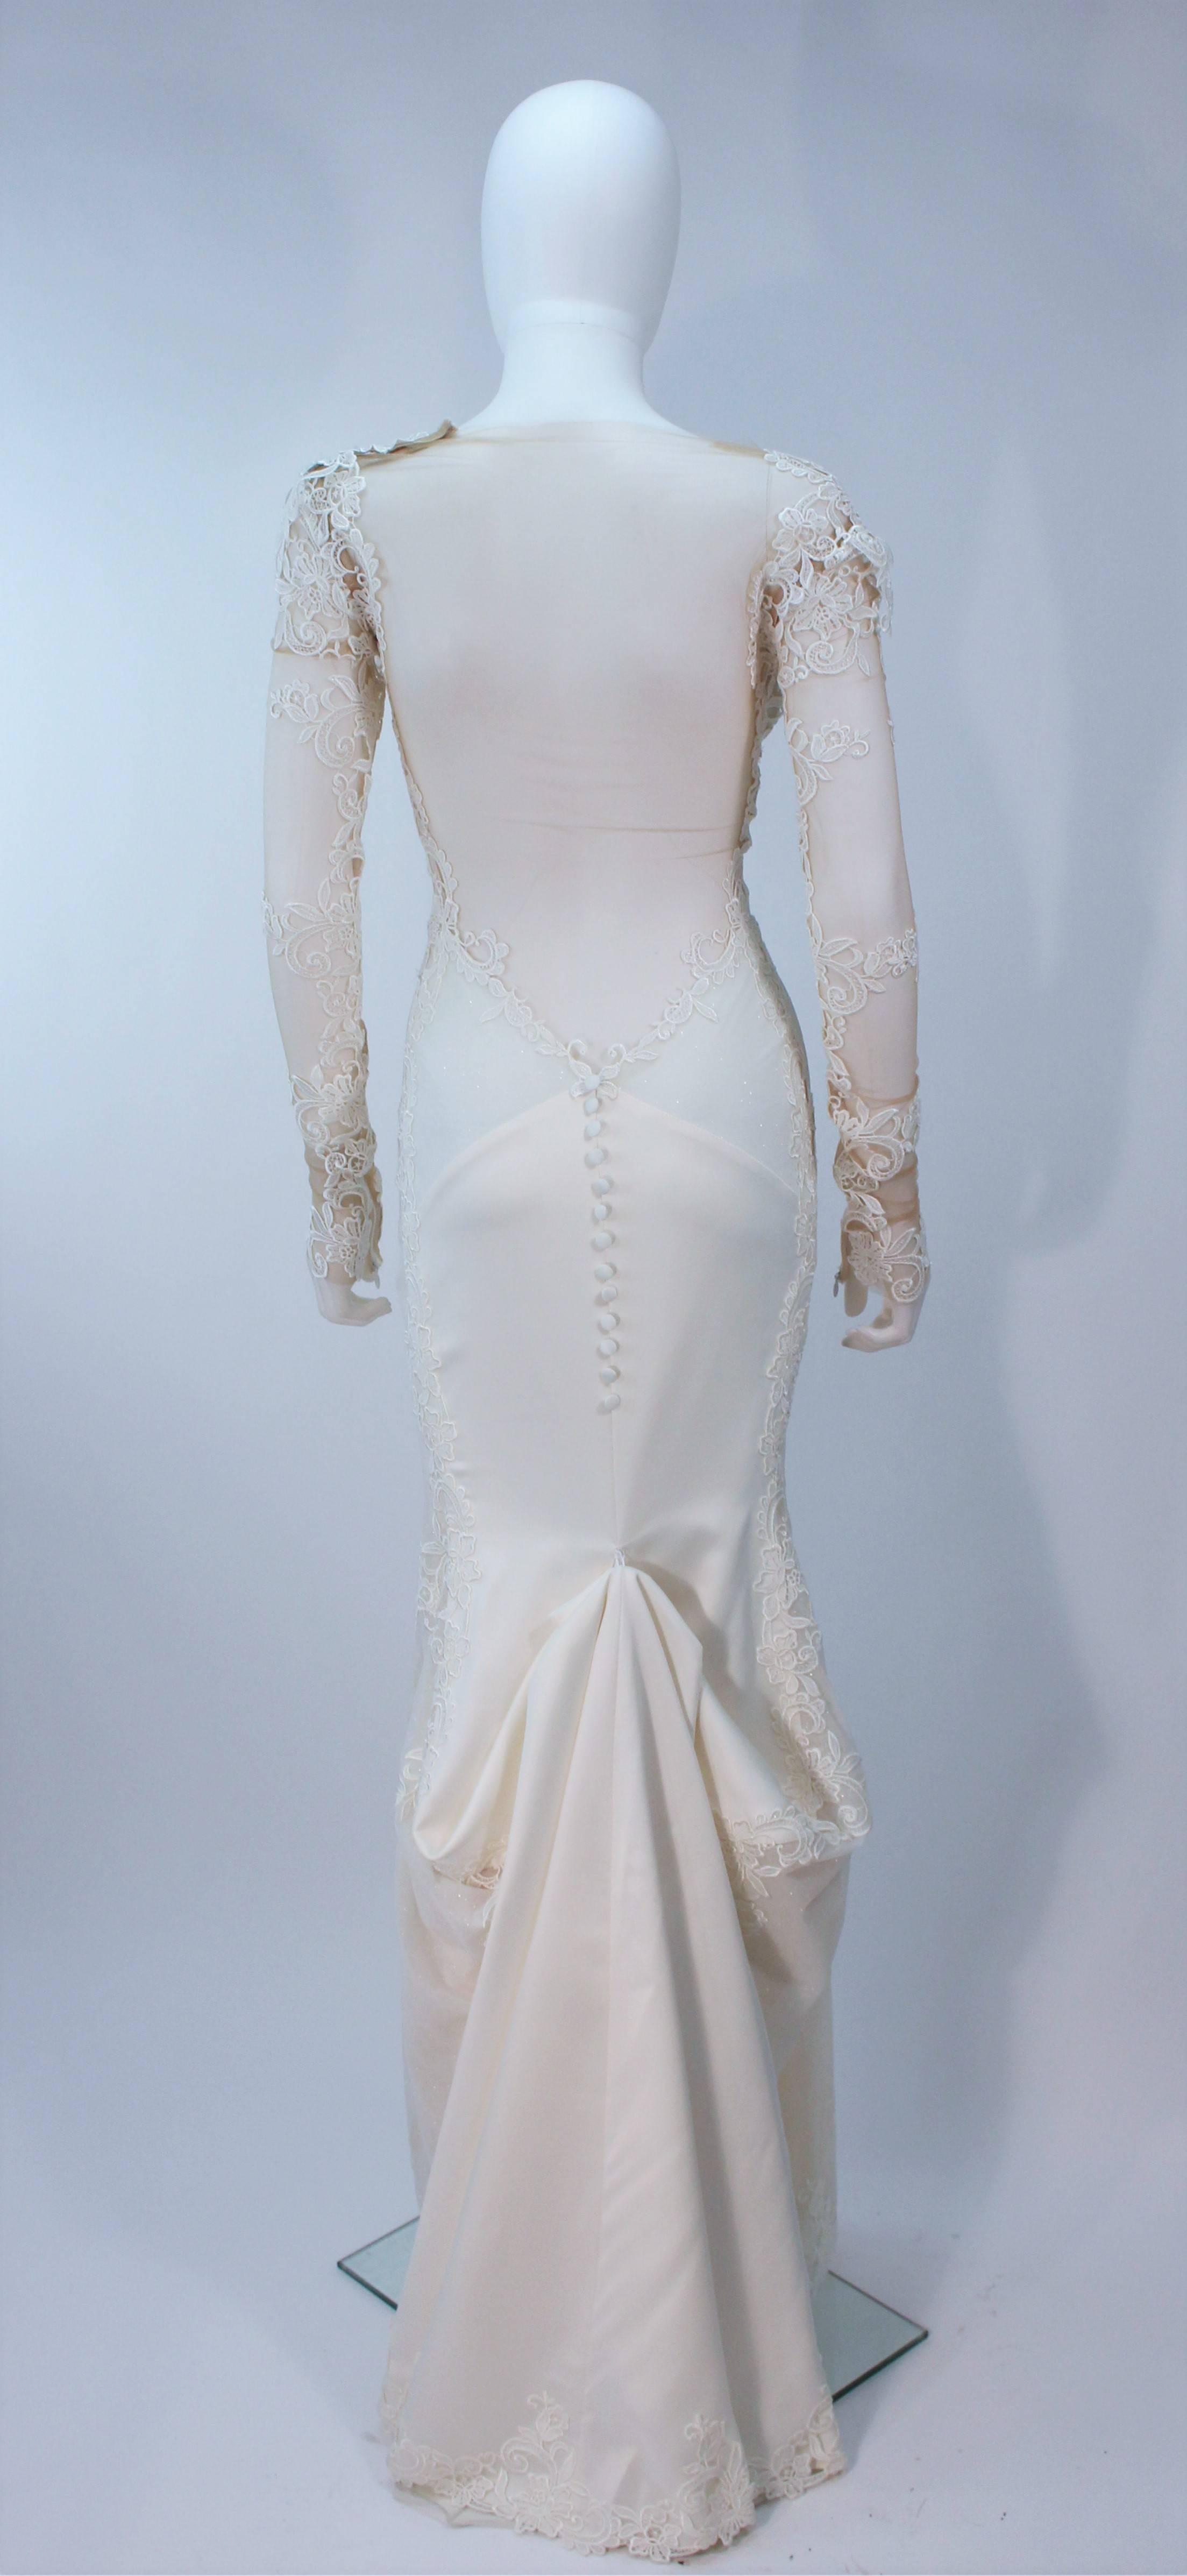 GALIA LAHAV Couture White Floral Lace Gown with Train and Sheer Details Size 2 4